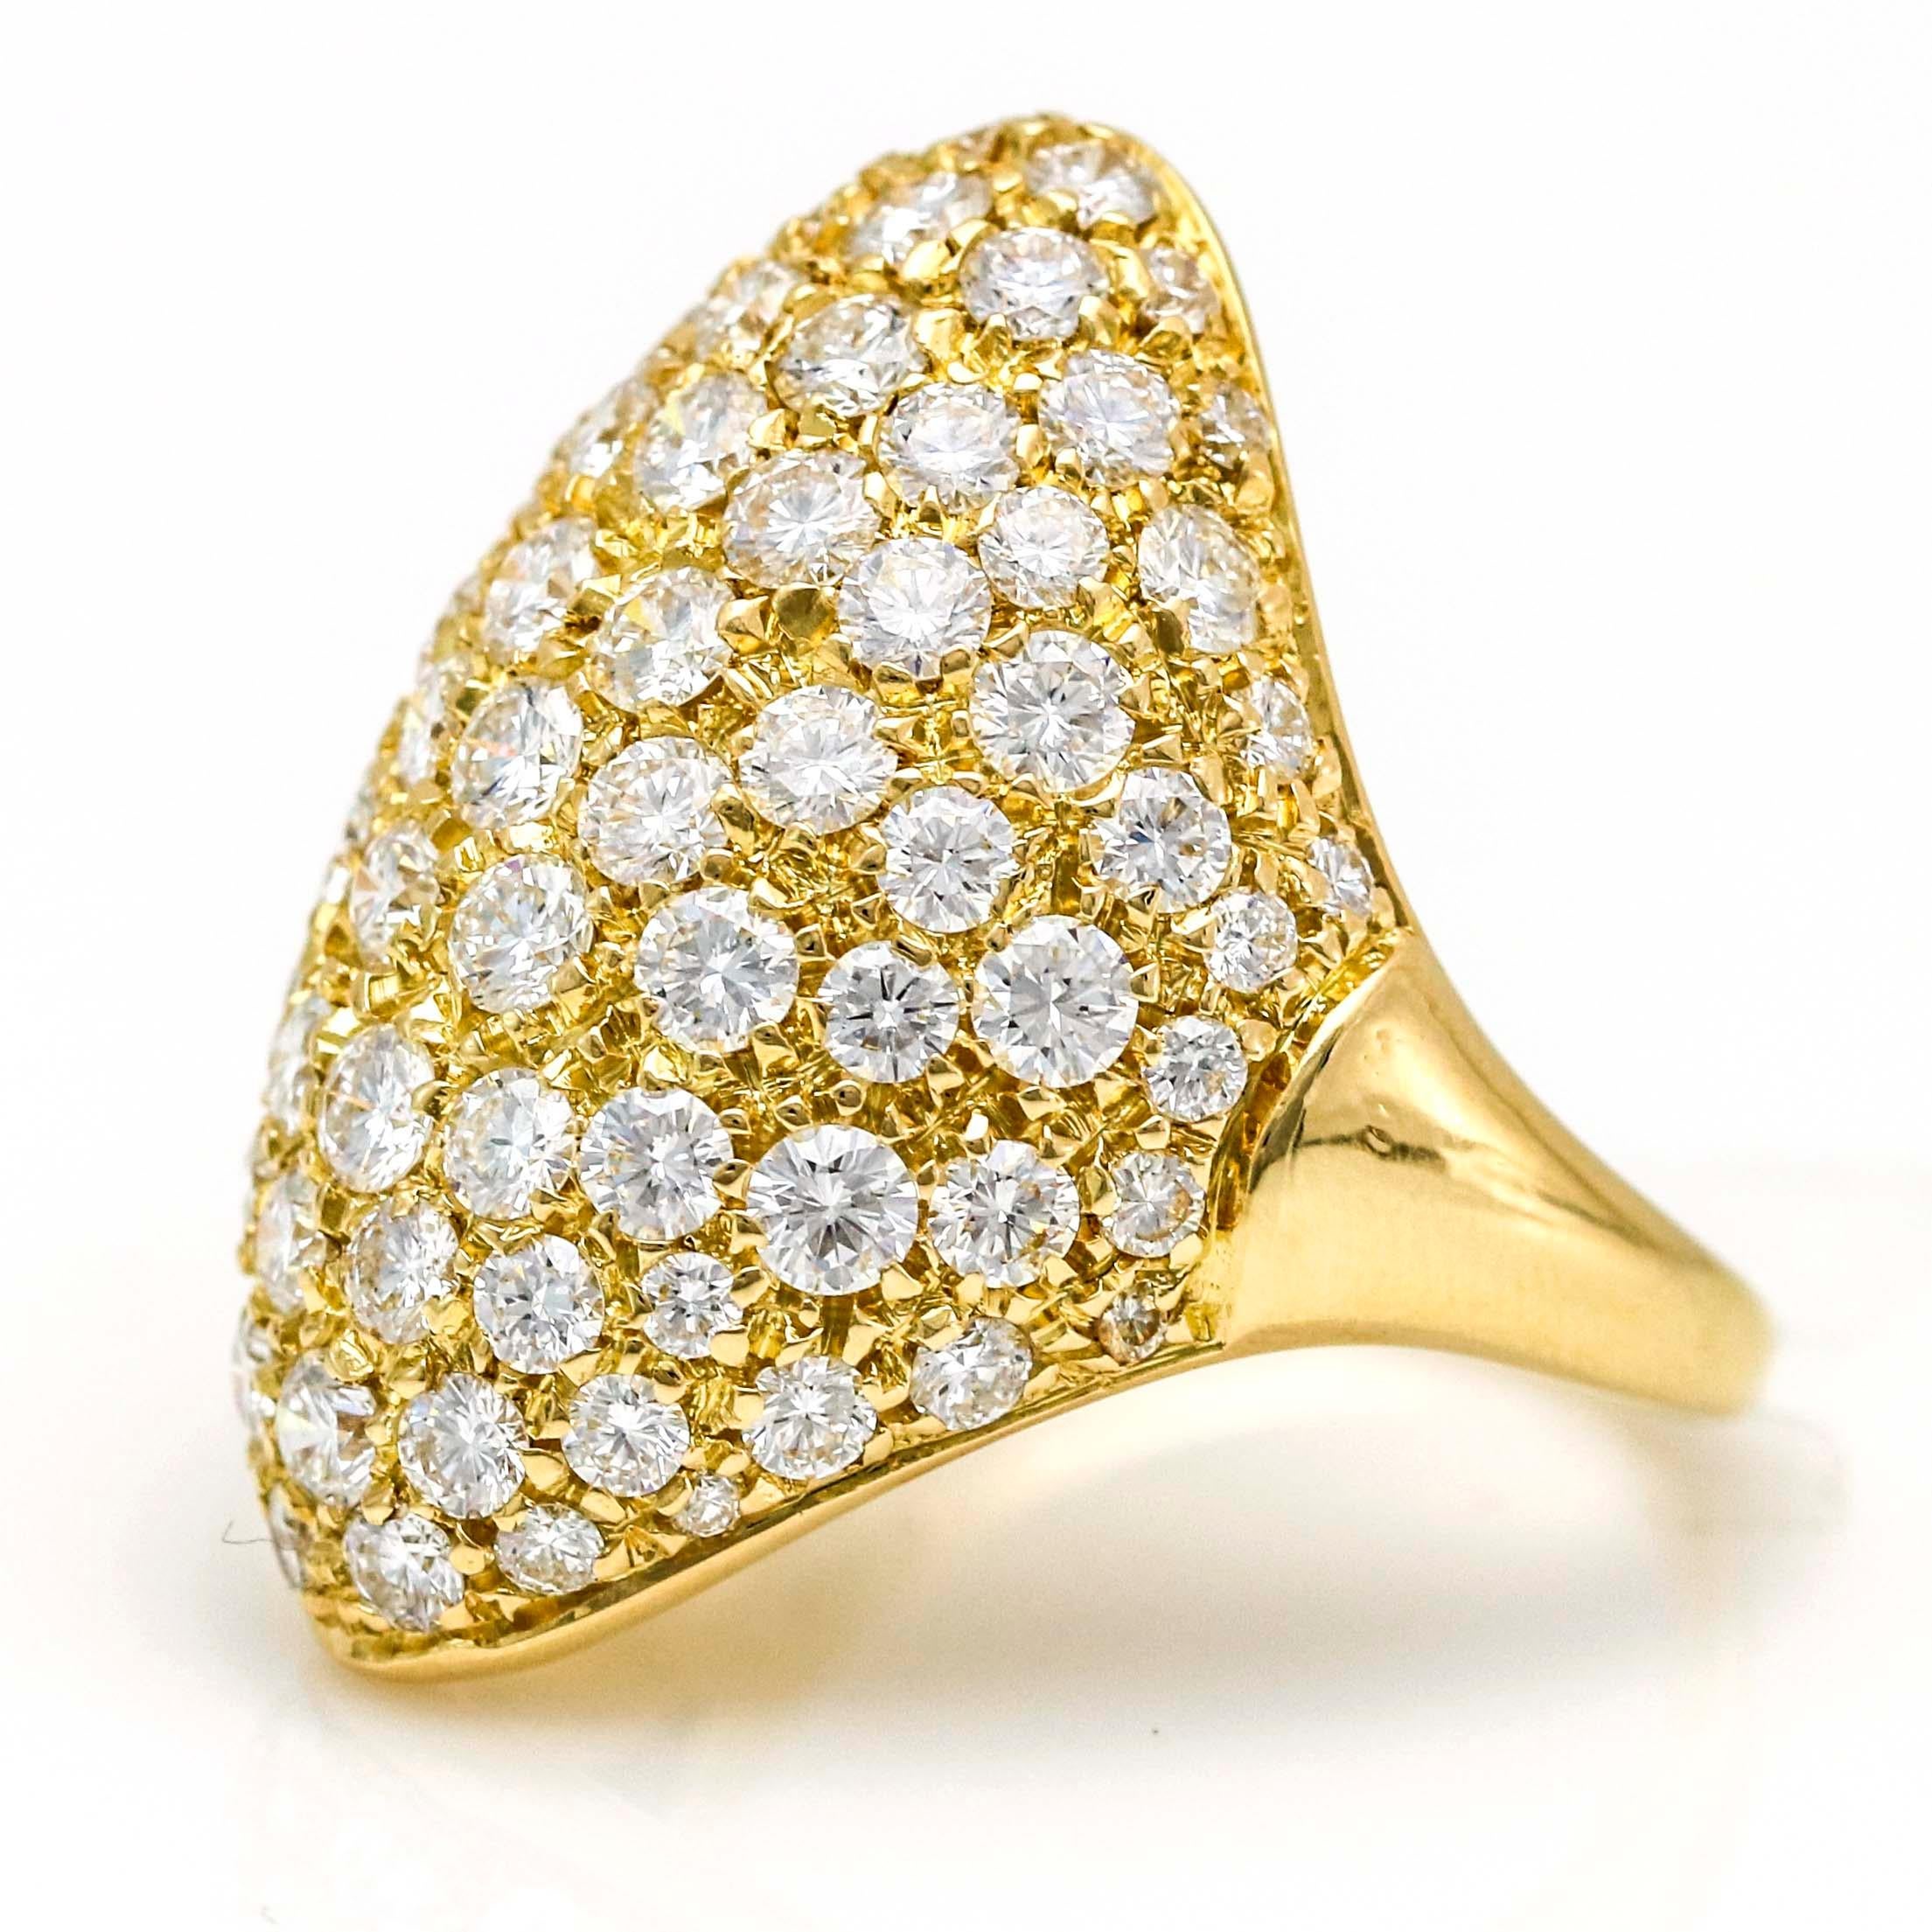 Retro shield cocktail ring with diamonds in 18 karat yellow gold. Made in Italy. Estimated total carat weight, 3.33 carats. Length, 26.5mm. Height from finger, 8mm. Size 7. Signed 1647 AL.